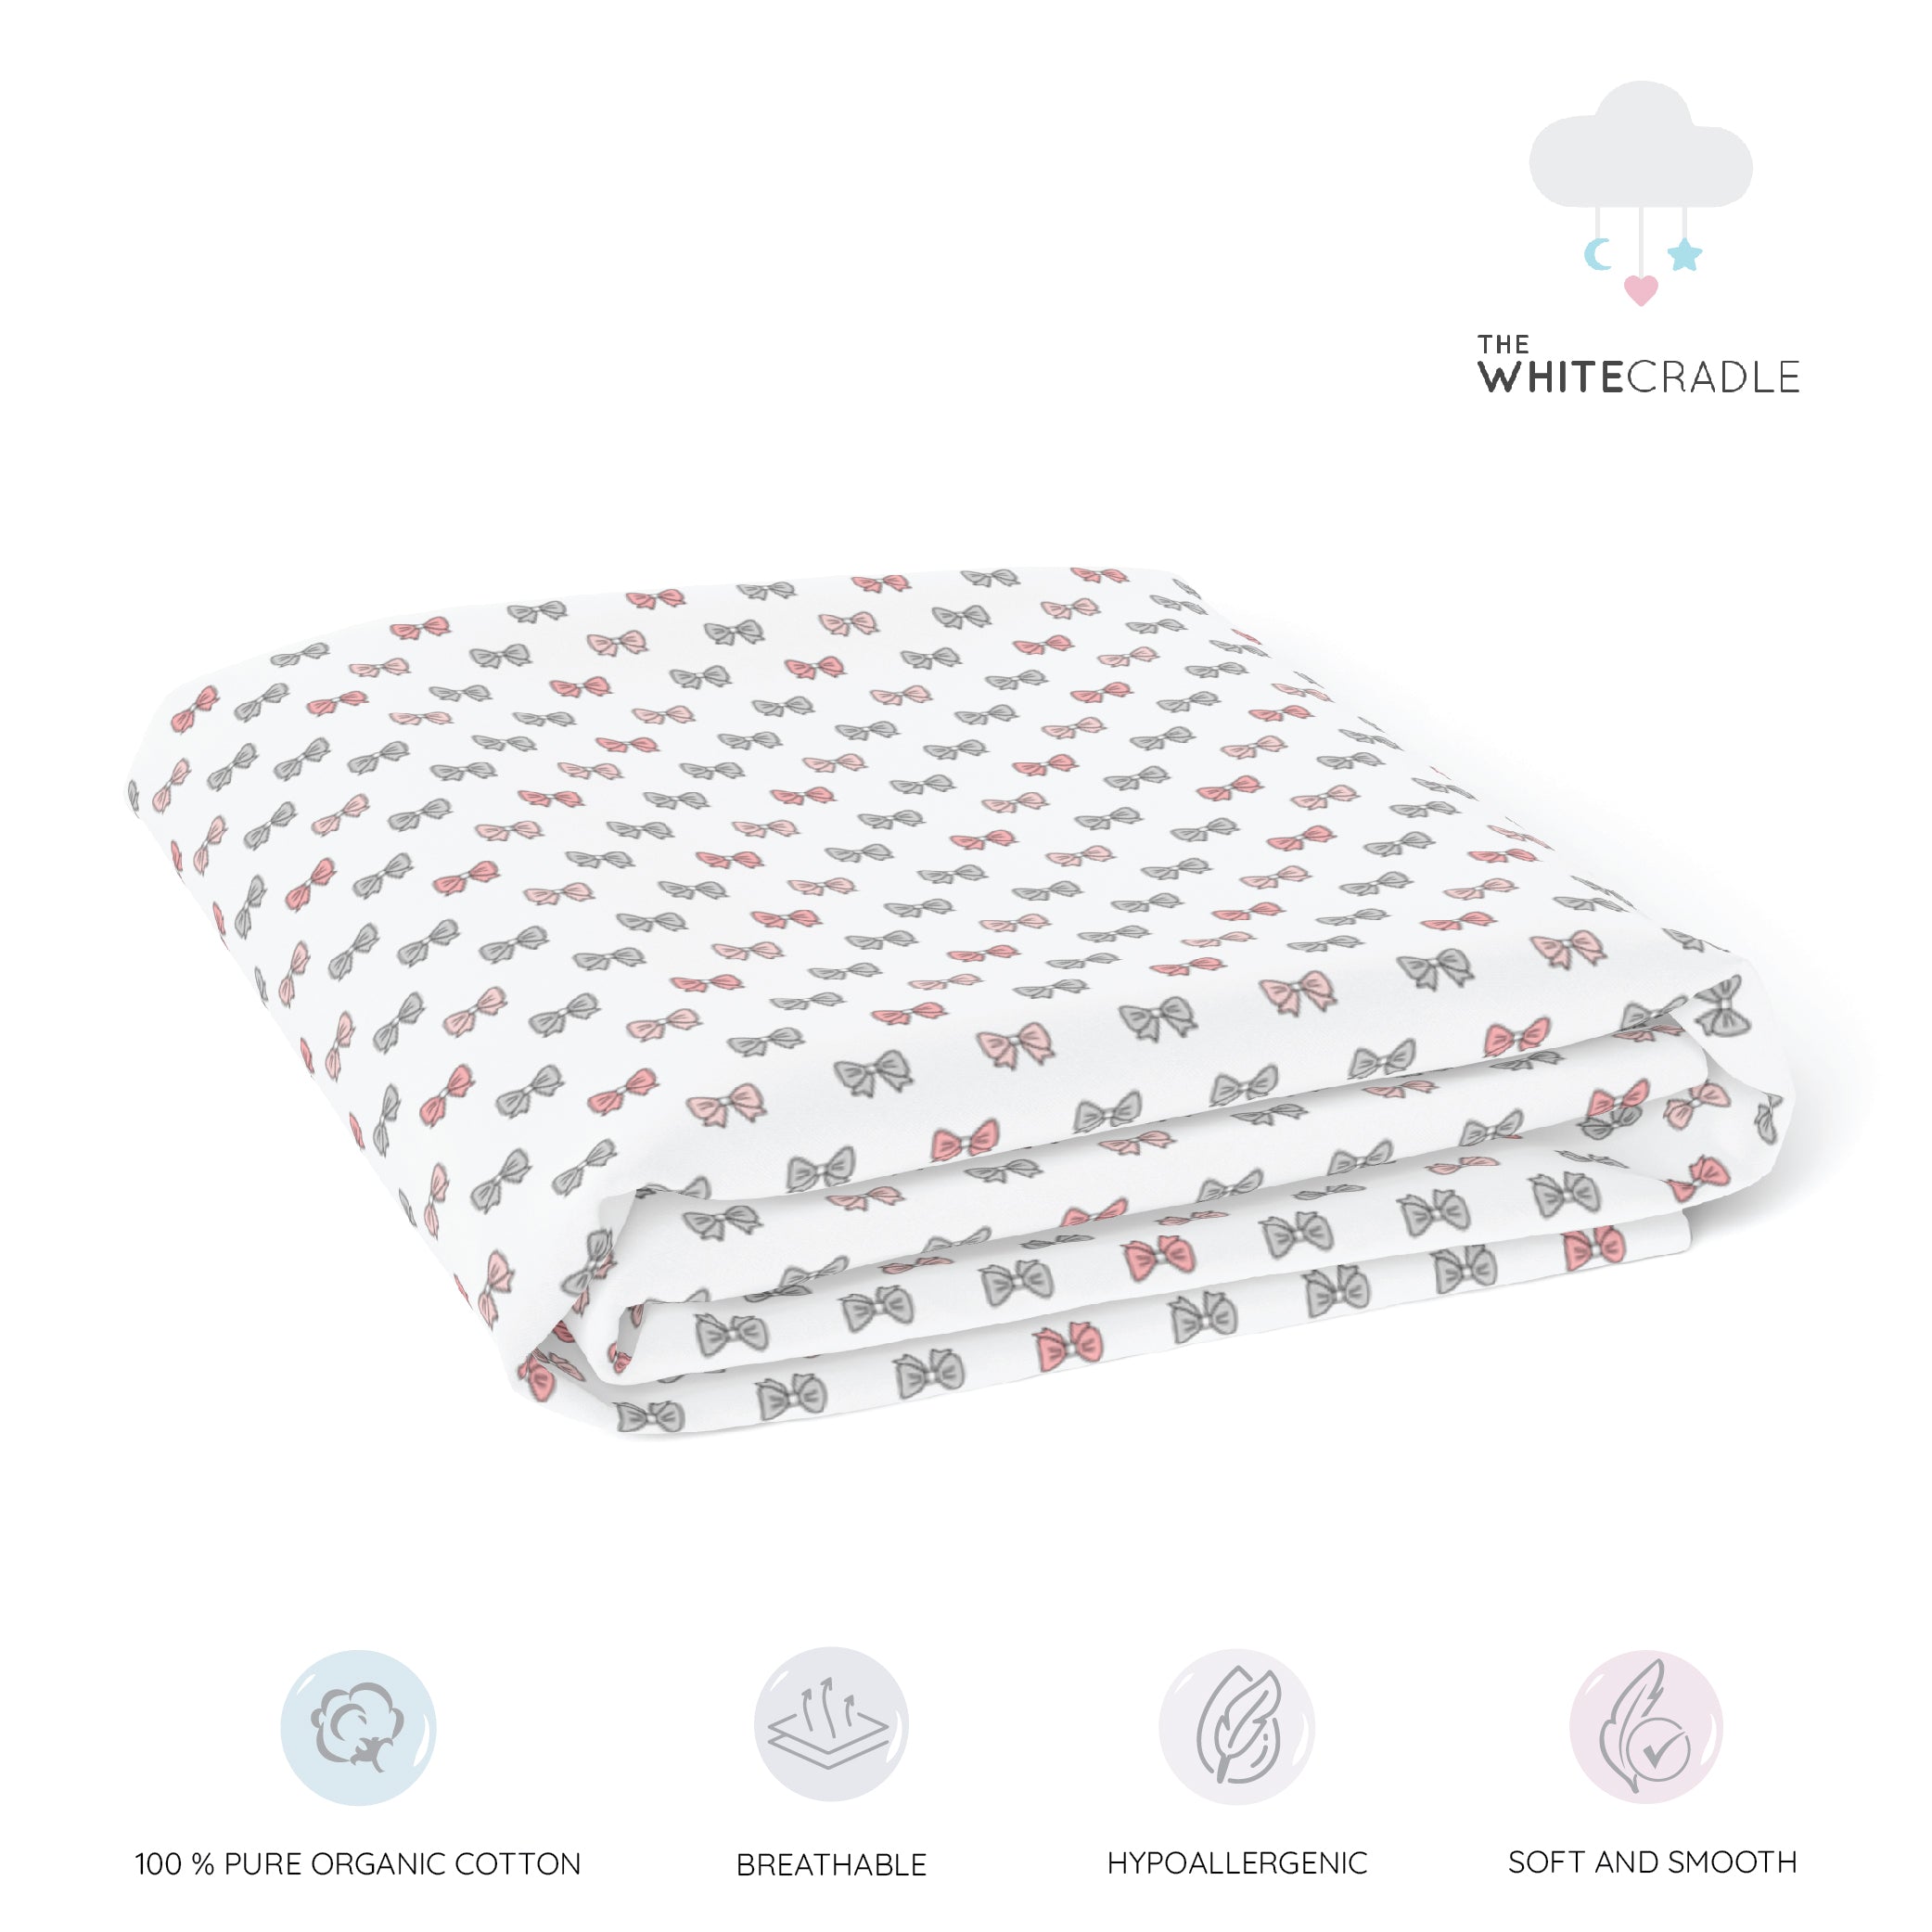 The White Cradle Pure Organic Cotton Fitted Cot Sheet for Baby Crib 28 x 52 inch - Pink Bows (Large)